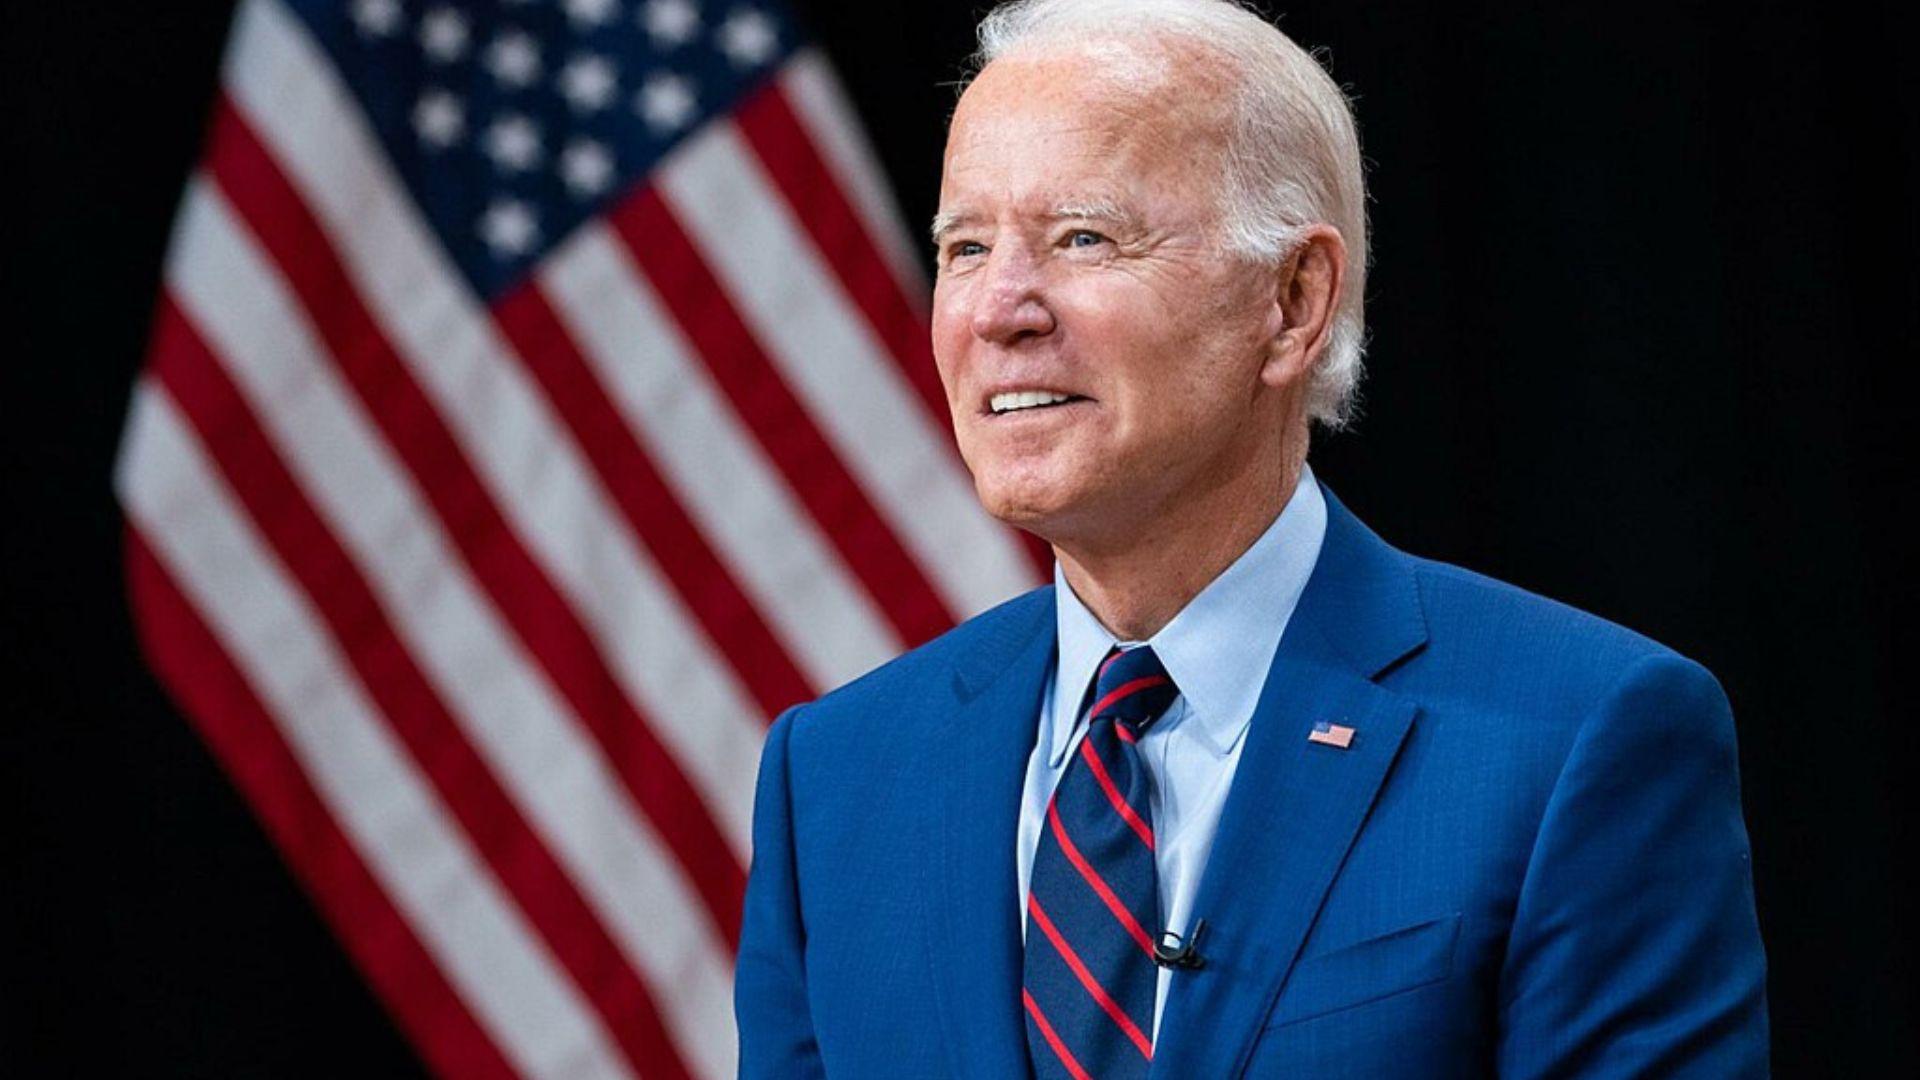 <p>Despite a history of skipping out on debates, Trump has been insistent that Biden agree to debate him, and has called on him to commit publicly to them in the past.   </p> <p>"President Trump has been very clear: he is willing to debate Joe Biden any time, any where, any place. We once again call on Joe Biden to commit to debates," <a href="https://abcnews.go.com/Politics/major-media-organizations-urge-biden-trump-debate/story?id=109169895">said </a>Trump spokeswoman Karoline Leavitt.   </p>